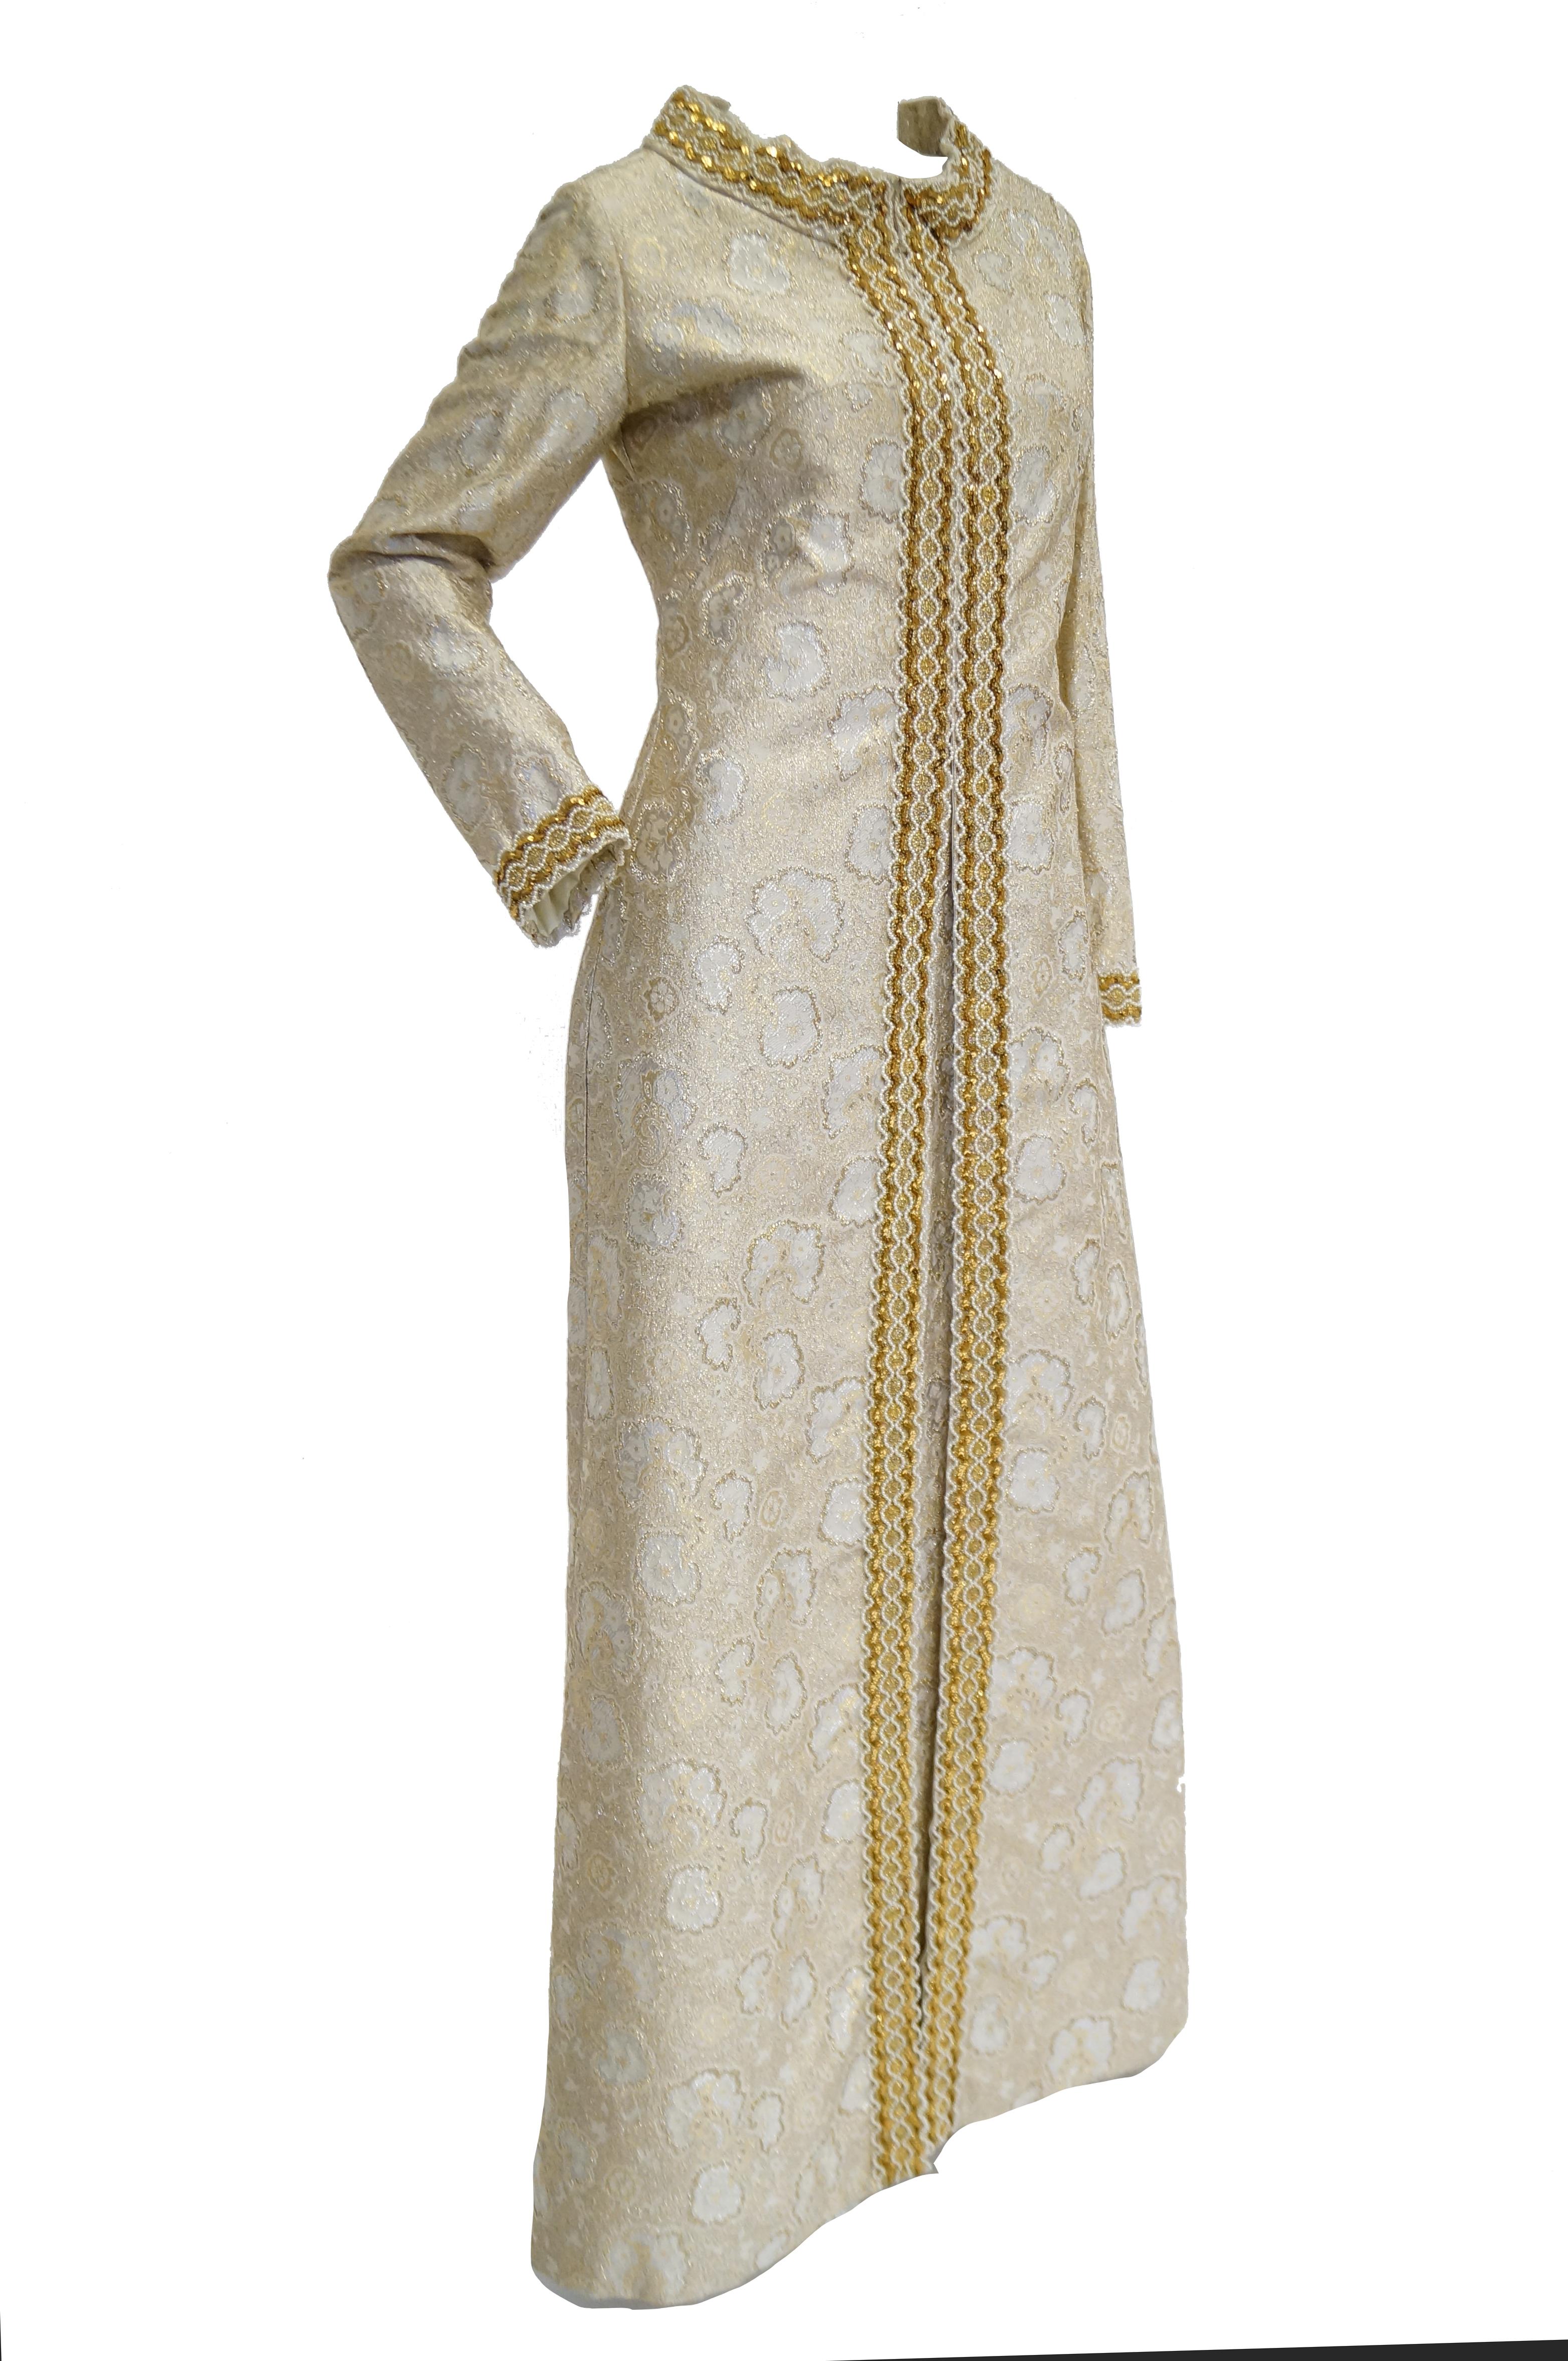 Women's 1960s Couture Metallic Gold Brocade Maxi Dress with Sequin and Pearl Bead Detail